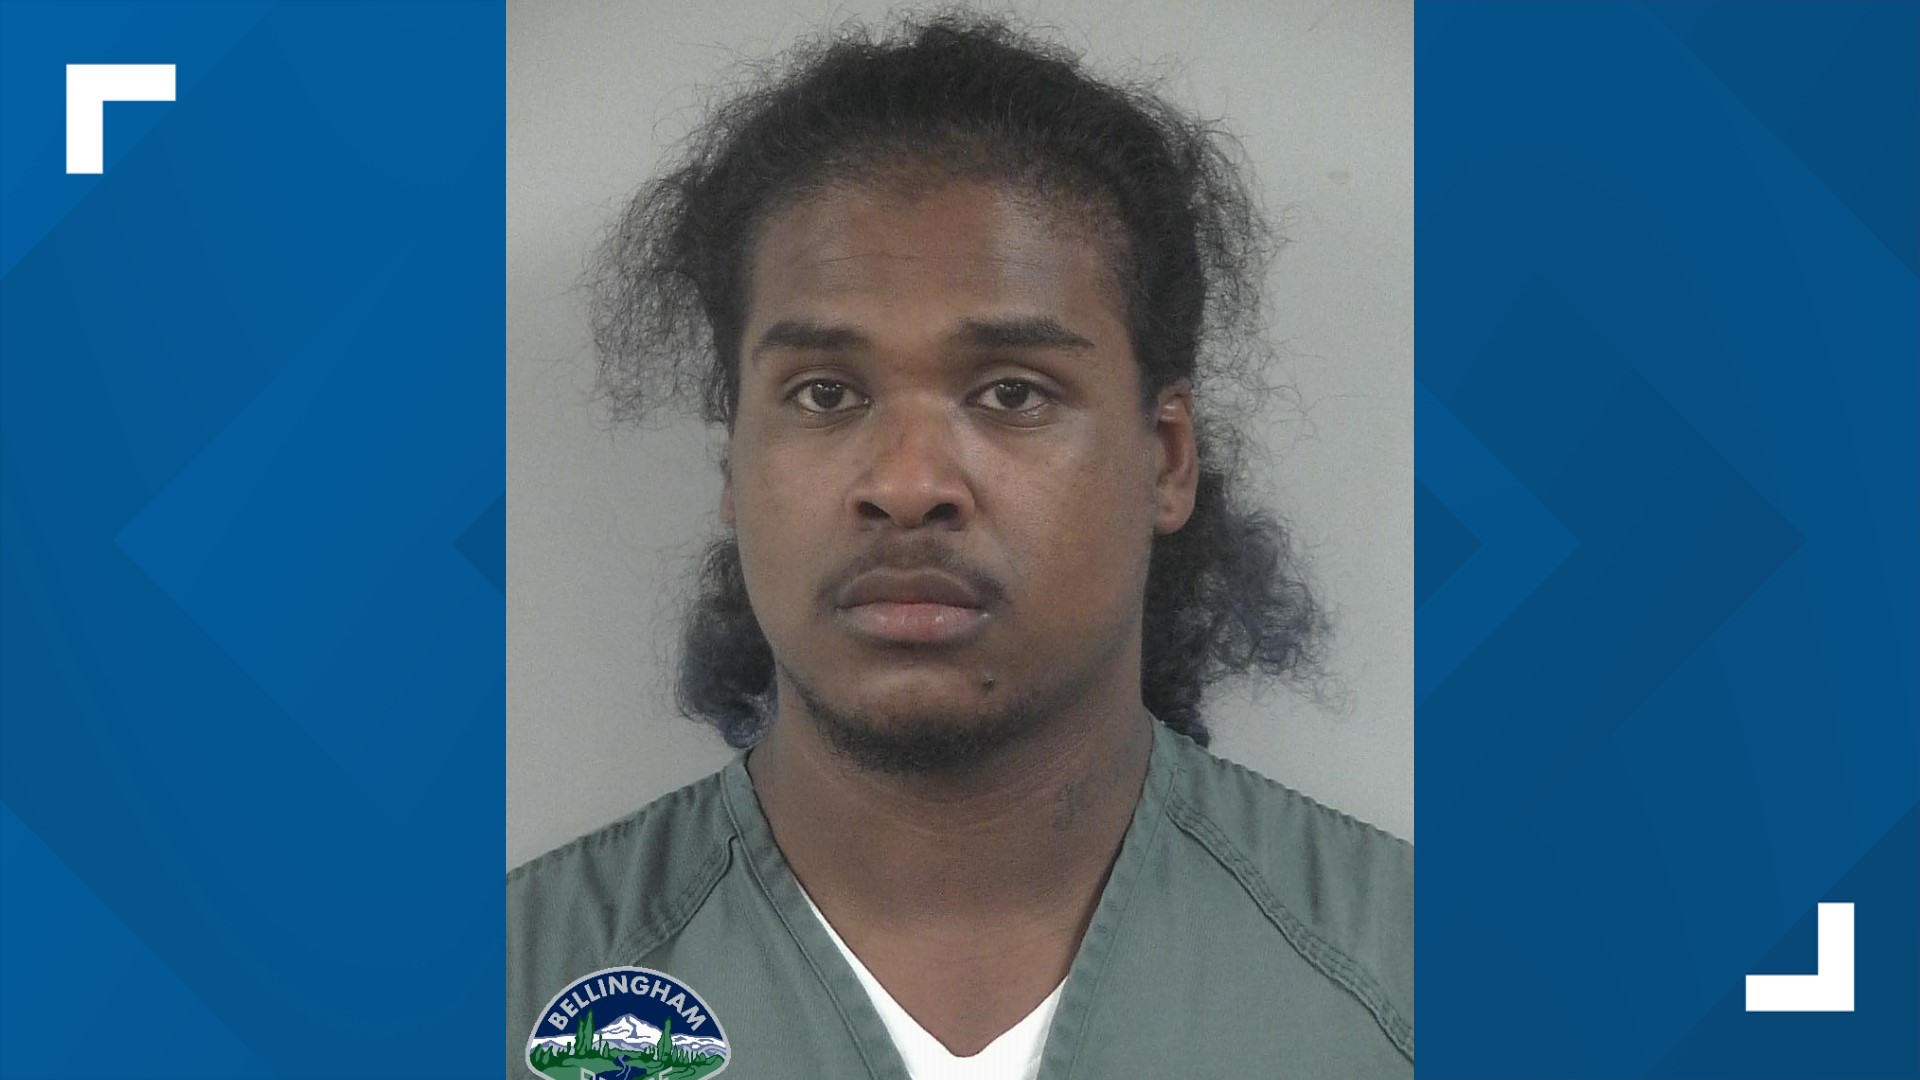 28-year-old Brandon Thompson is suspected of stealing numerous vehicles and fleeing from Bellingham police and the Washington State Patrol.